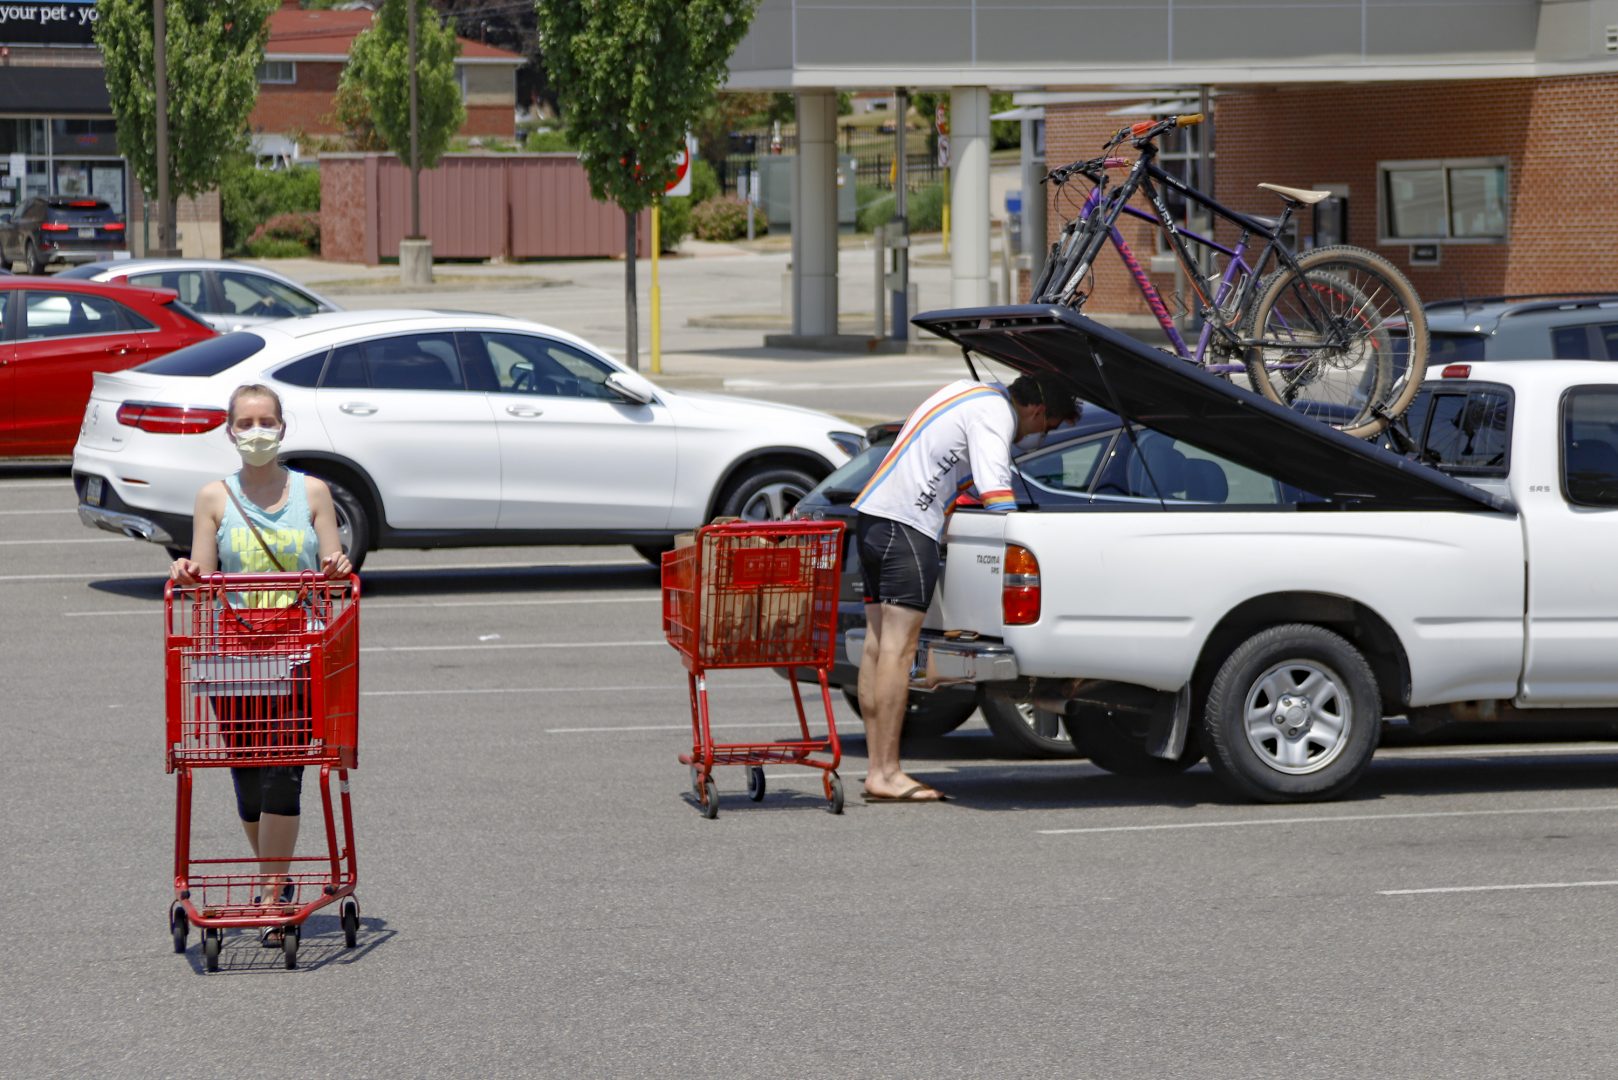 A woman and man wear COVID-19 protective masks as she pushes her shopping cart and a man loads his truck in a parking lot, Friday, July 3, 2020, in McCandless, Pa.